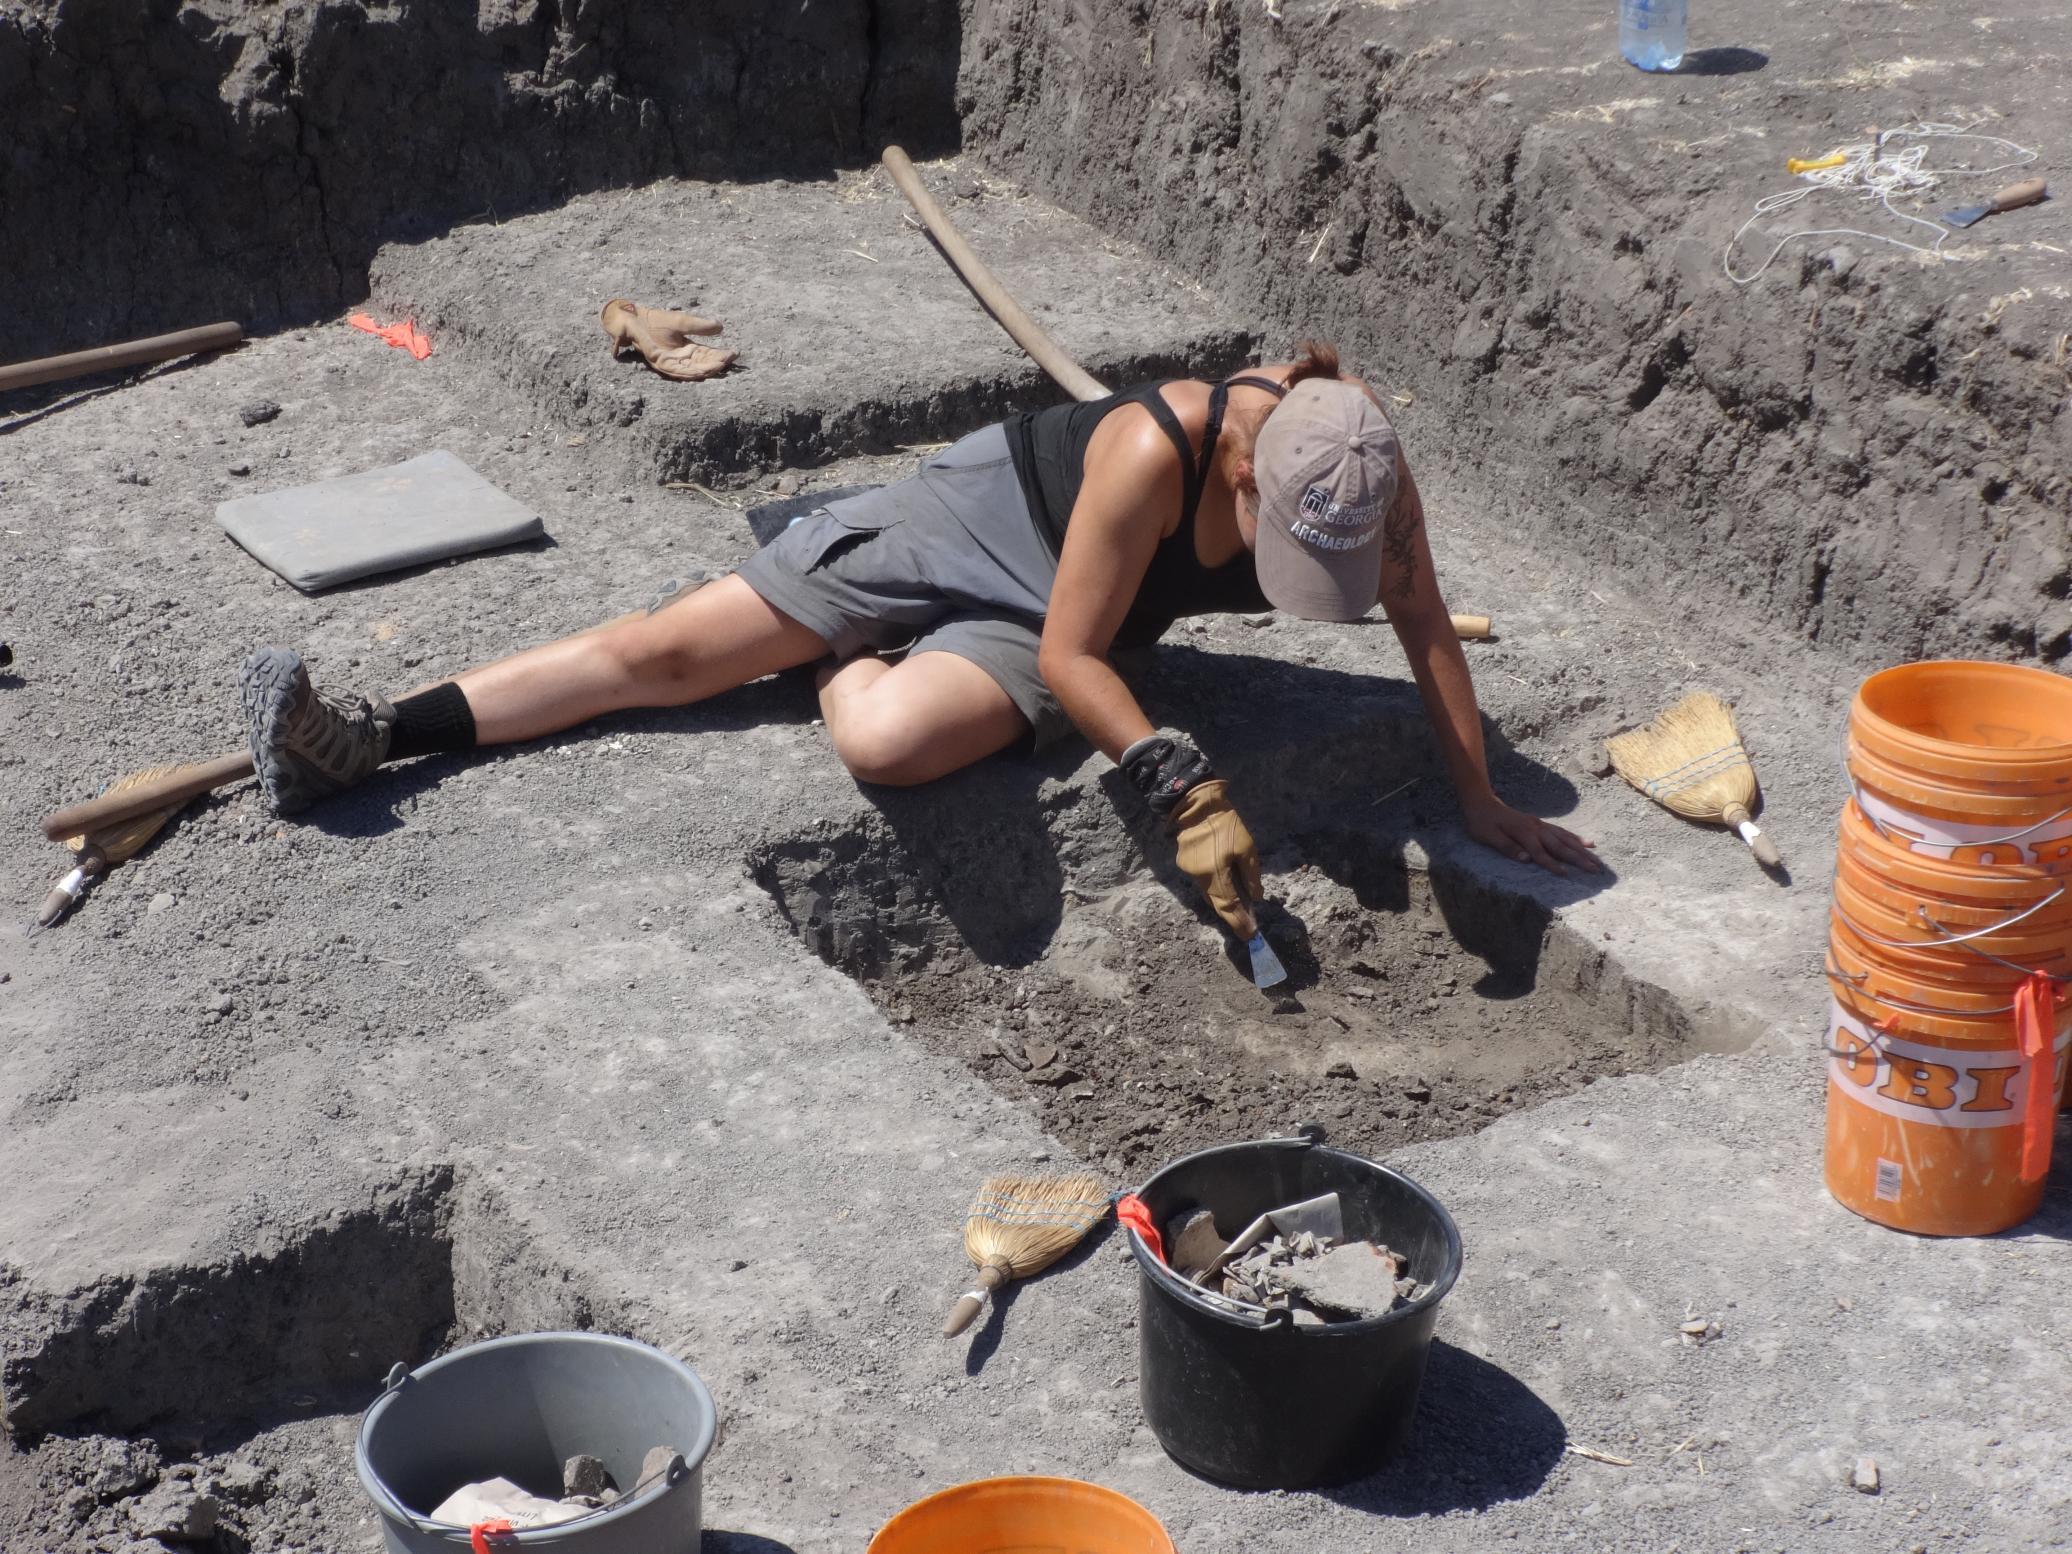 "In this picture, I am excavating the edge of a pit feature at a Bodrogkeresztúr site during the 2022 field season for the Copper Age Settlement Project (CASP) in Békés, Hungary." -Victoria Nuccio